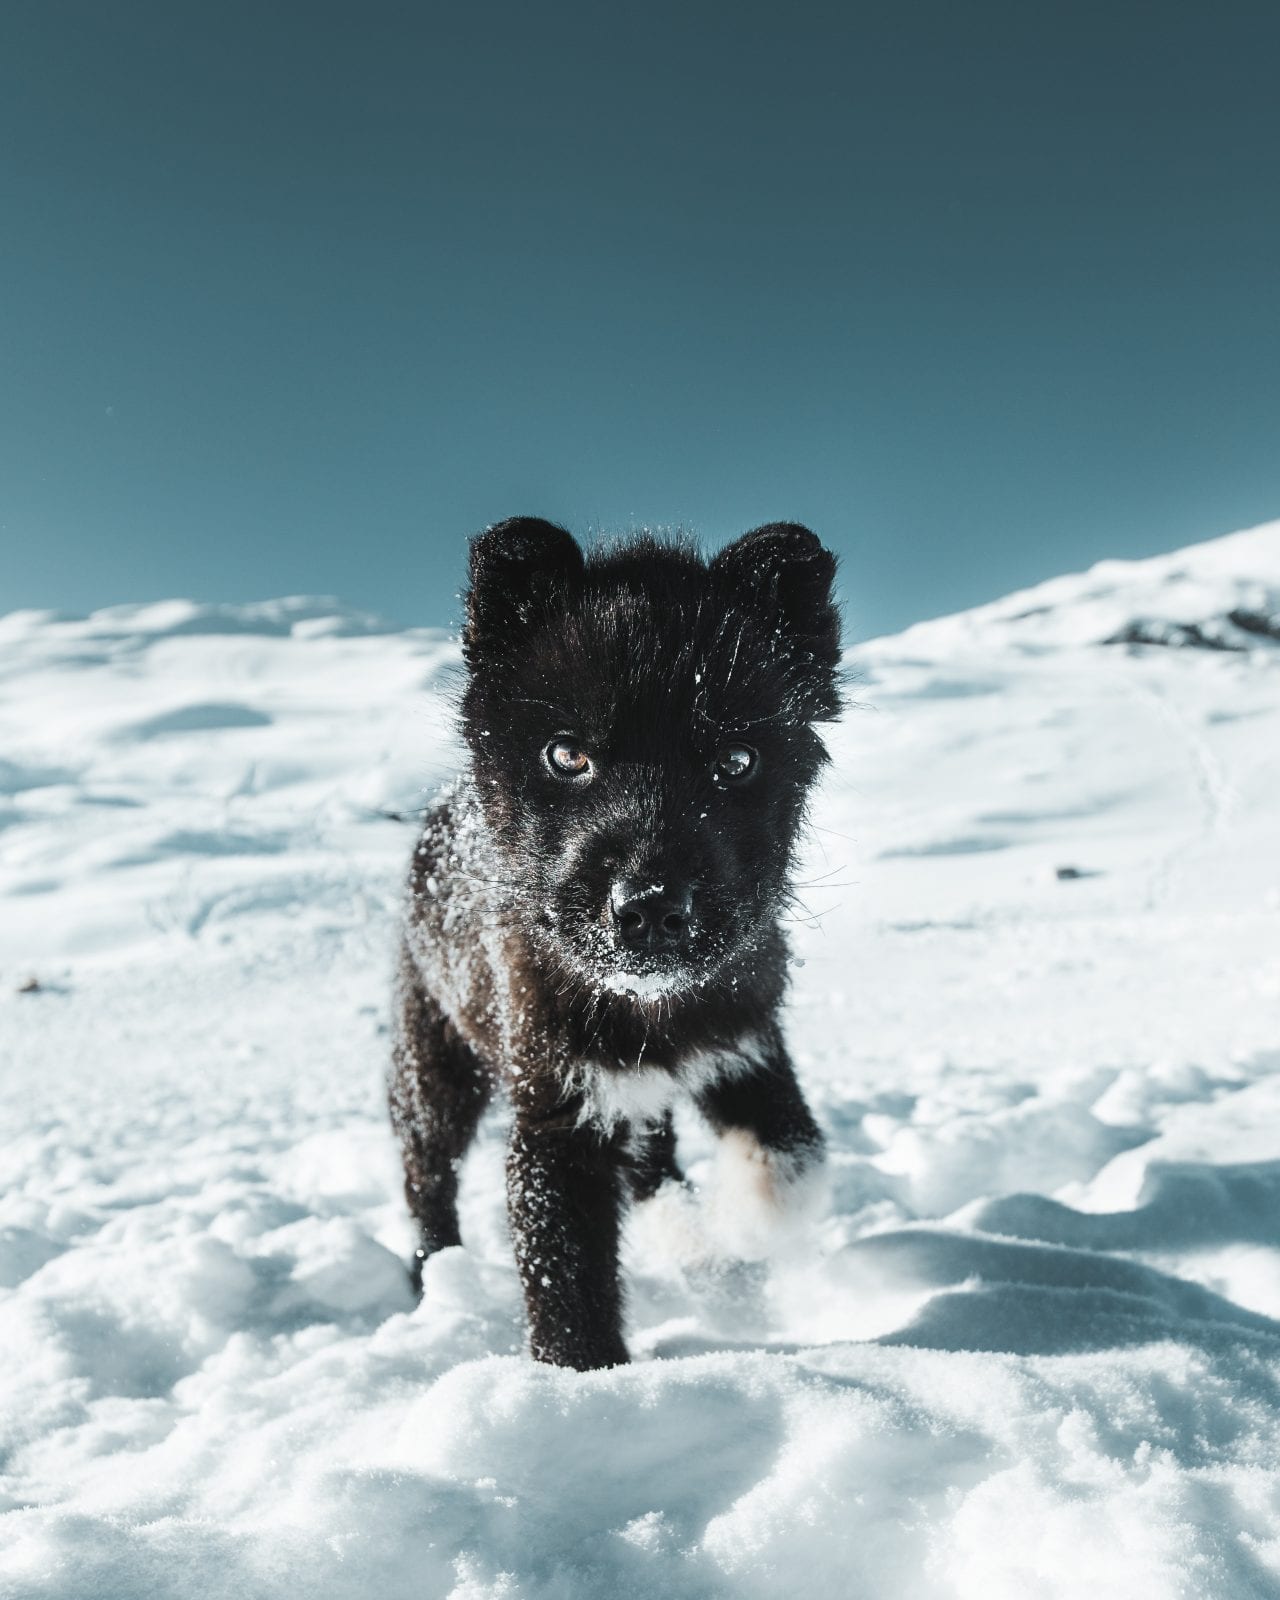 A black arctic fox facing directly into the camera, with a snowy landscape surrounding it